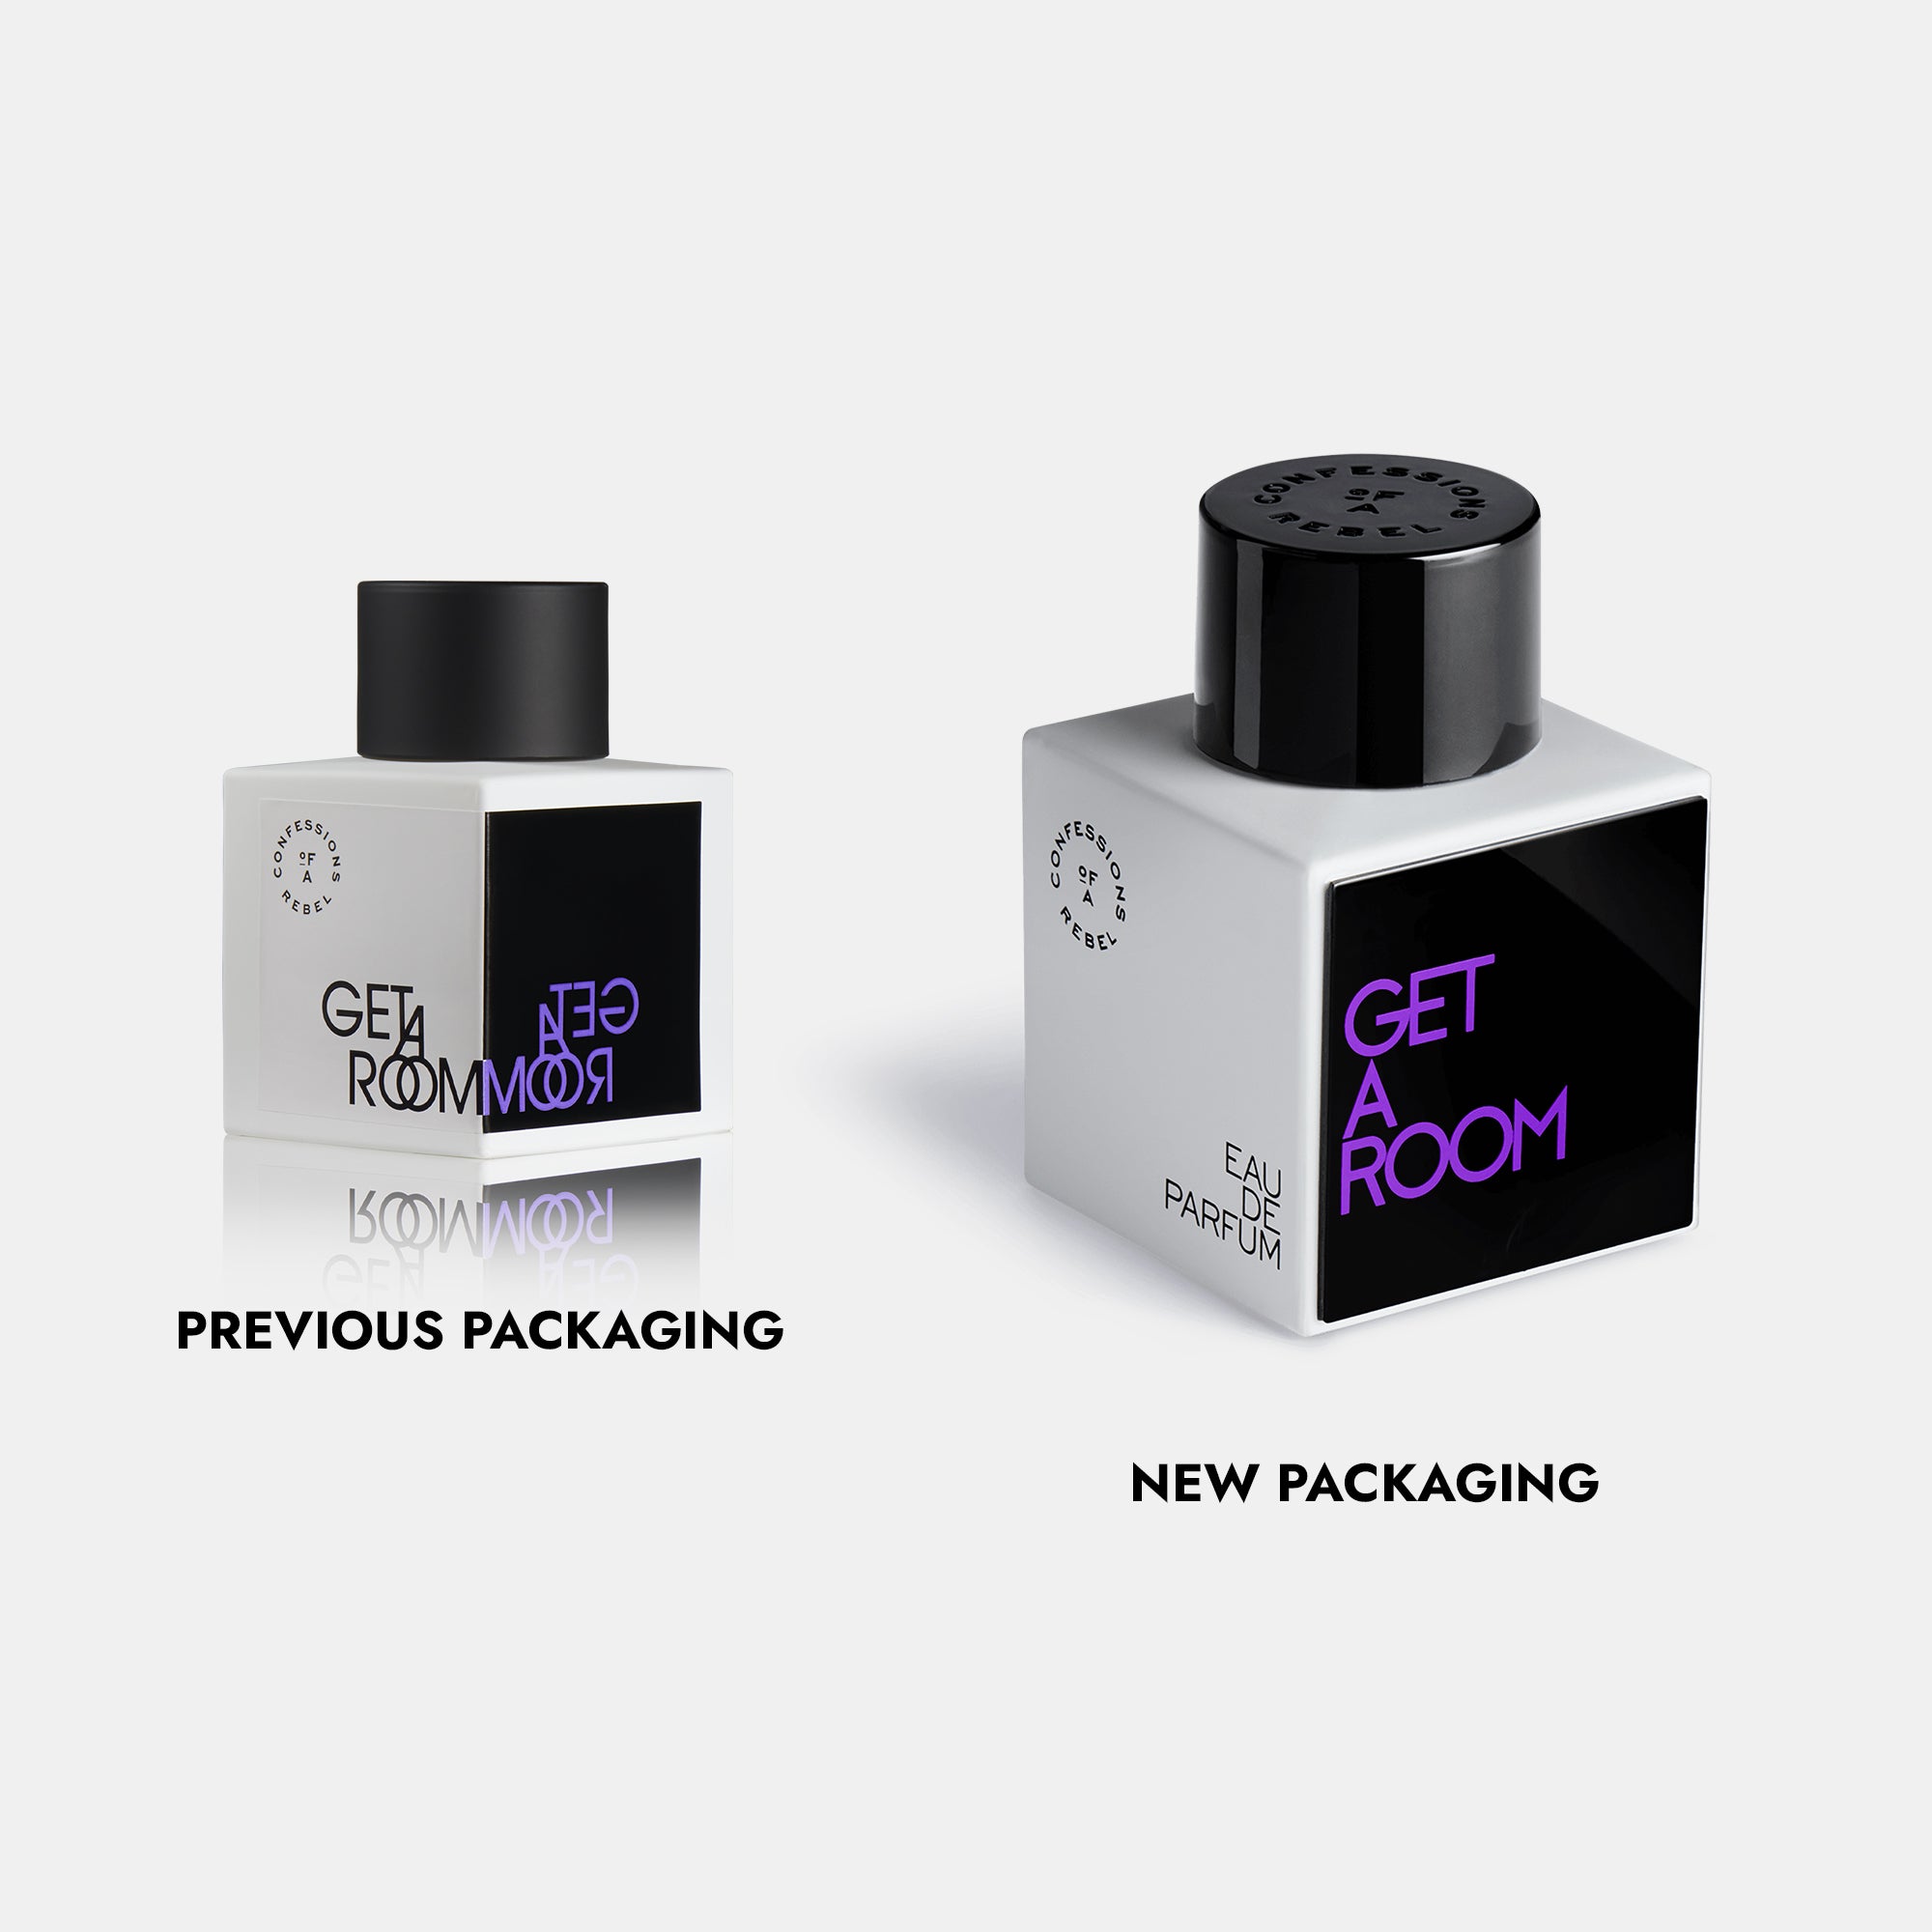 Car Scent Trio in Get a Room – Confessions of a Rebel